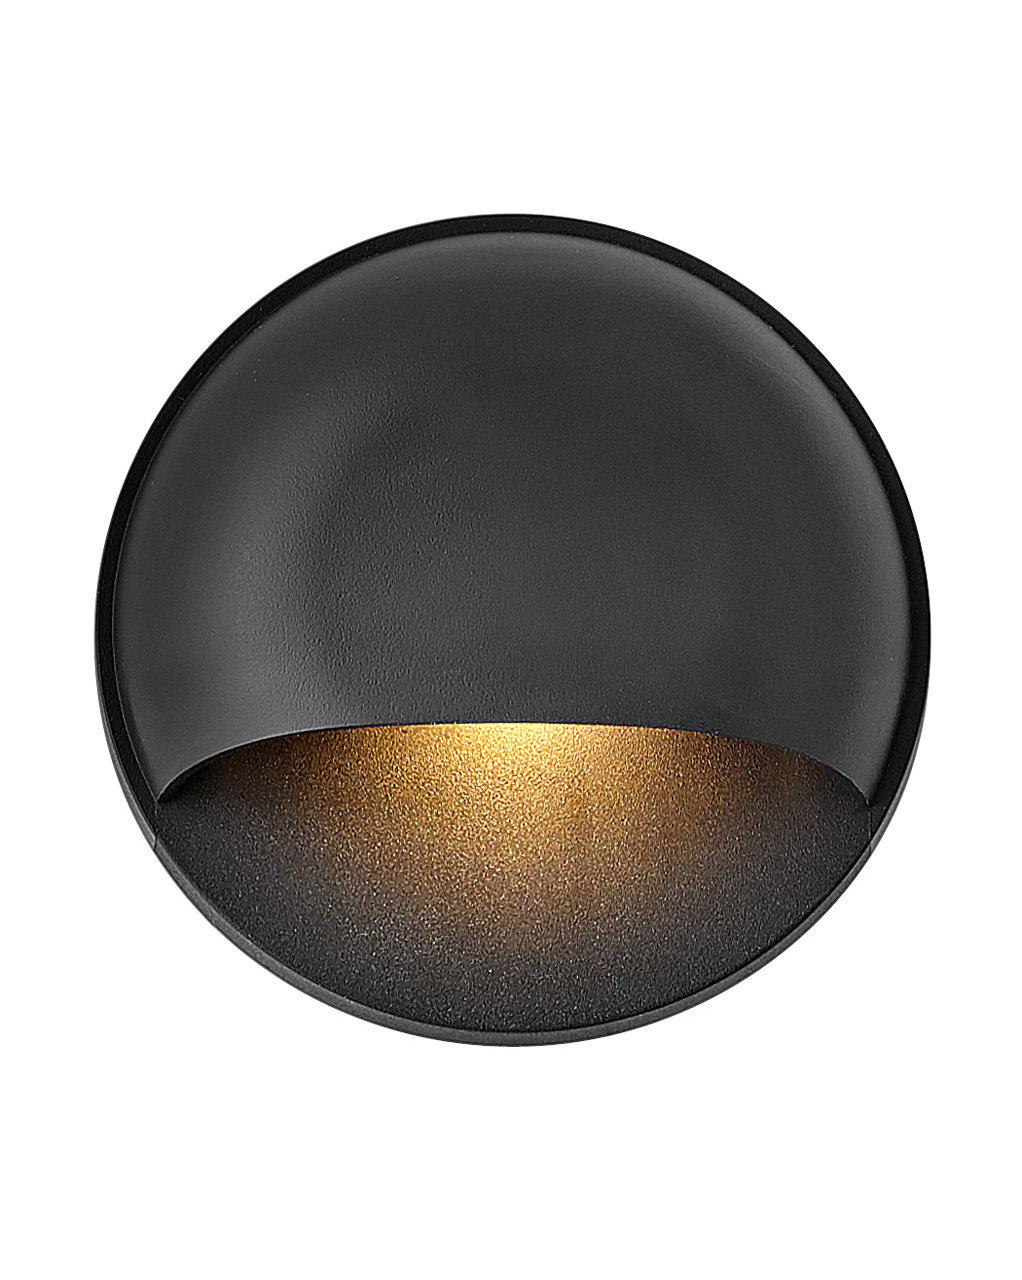 Hinkley Nuvi Round Deck Sconce